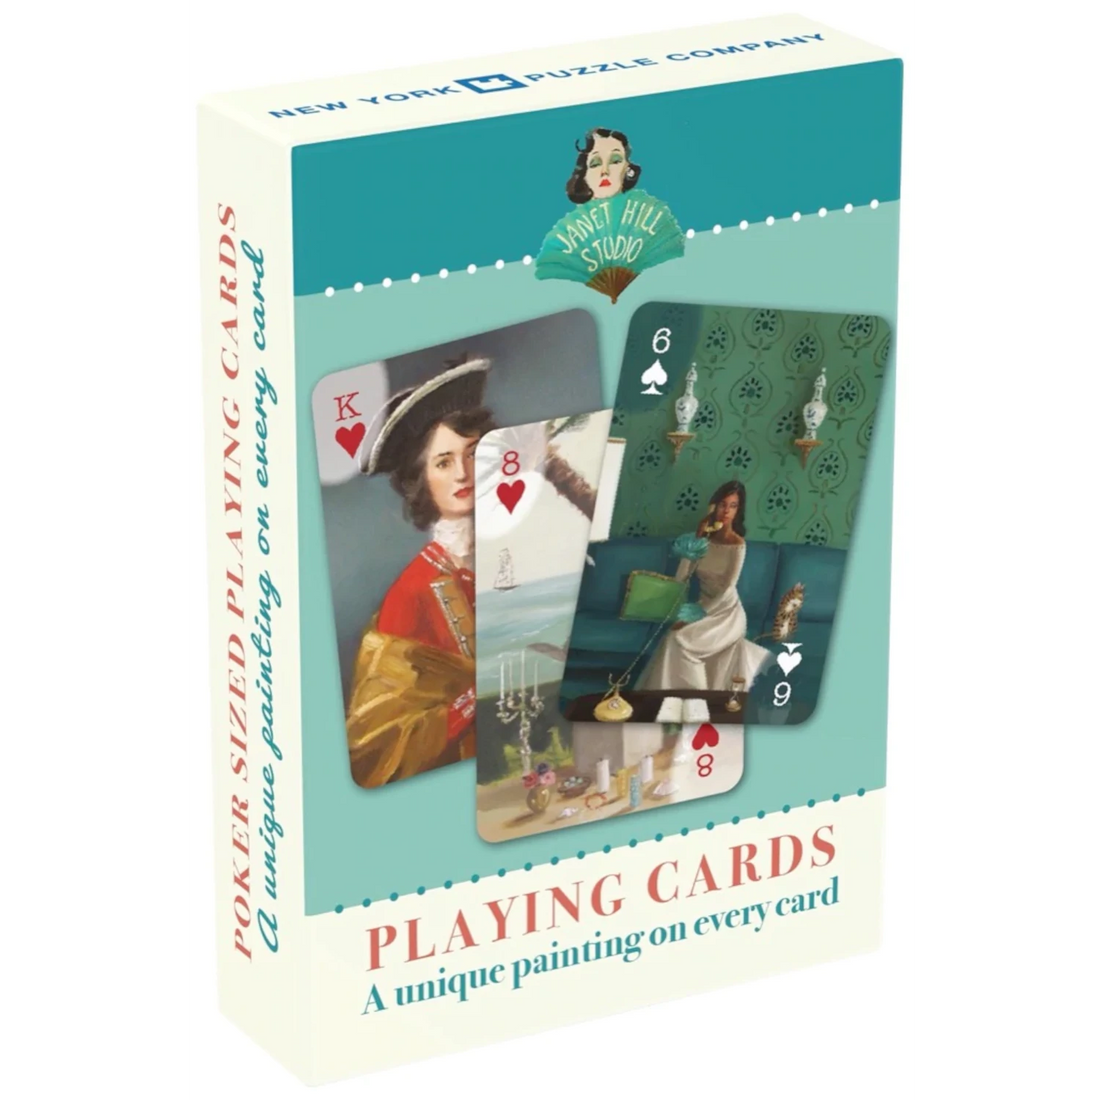 A set of Janet Hill Playing Cards featuring whimsical art prints of a woman by New York Puzzle Company.